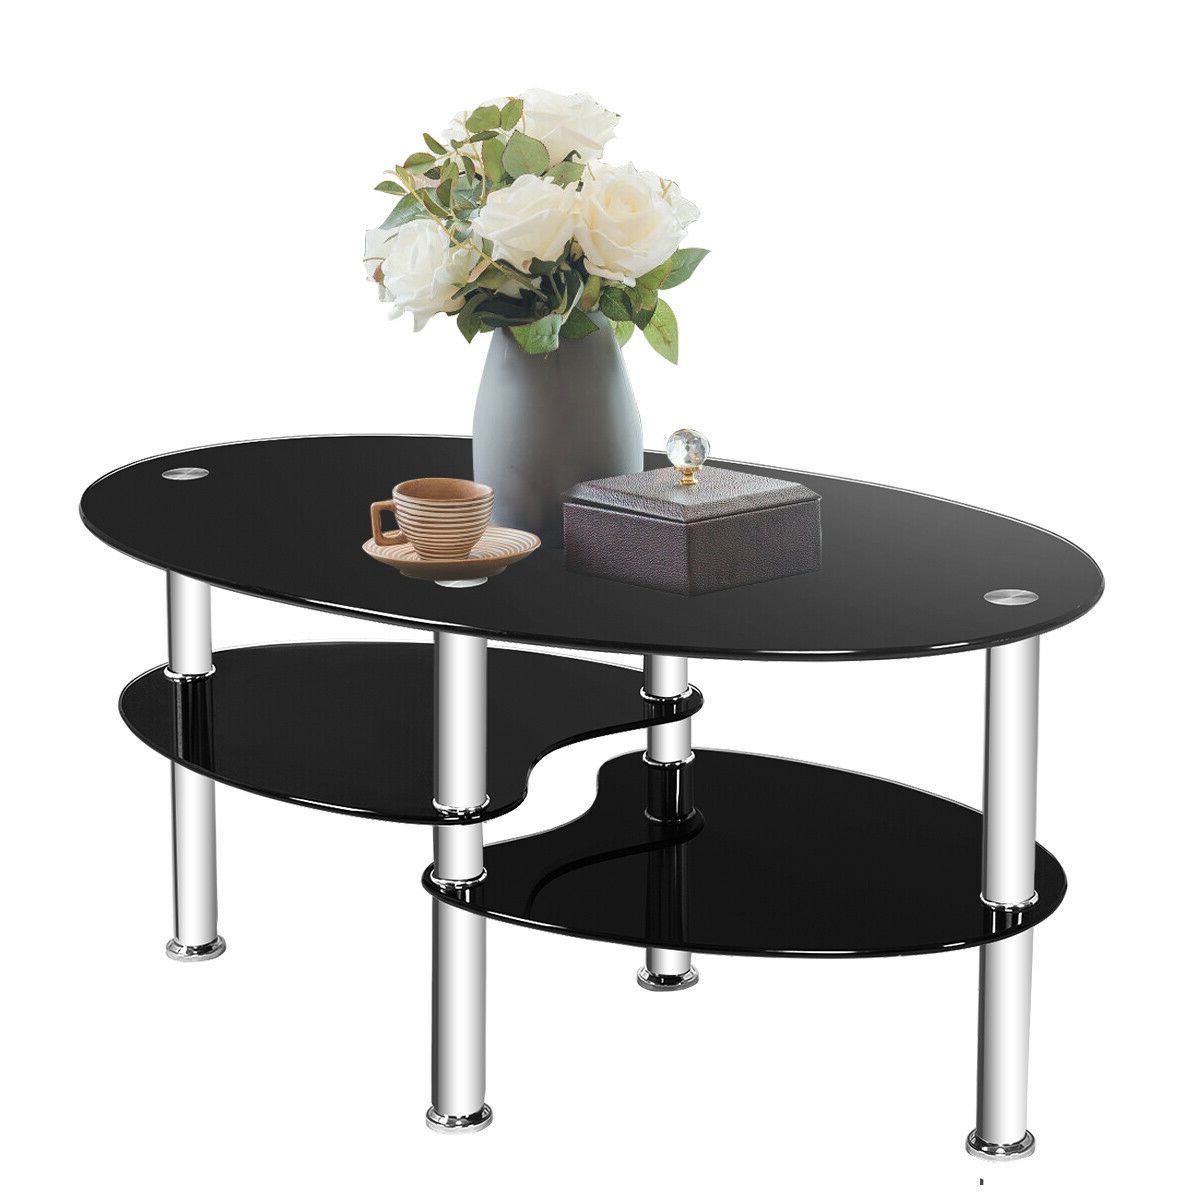 Tempered Glass Oval Side Tables With Popular Tempered Glass Oval Side Coffee Table Shelf Chrome Base Living Room (View 3 of 15)